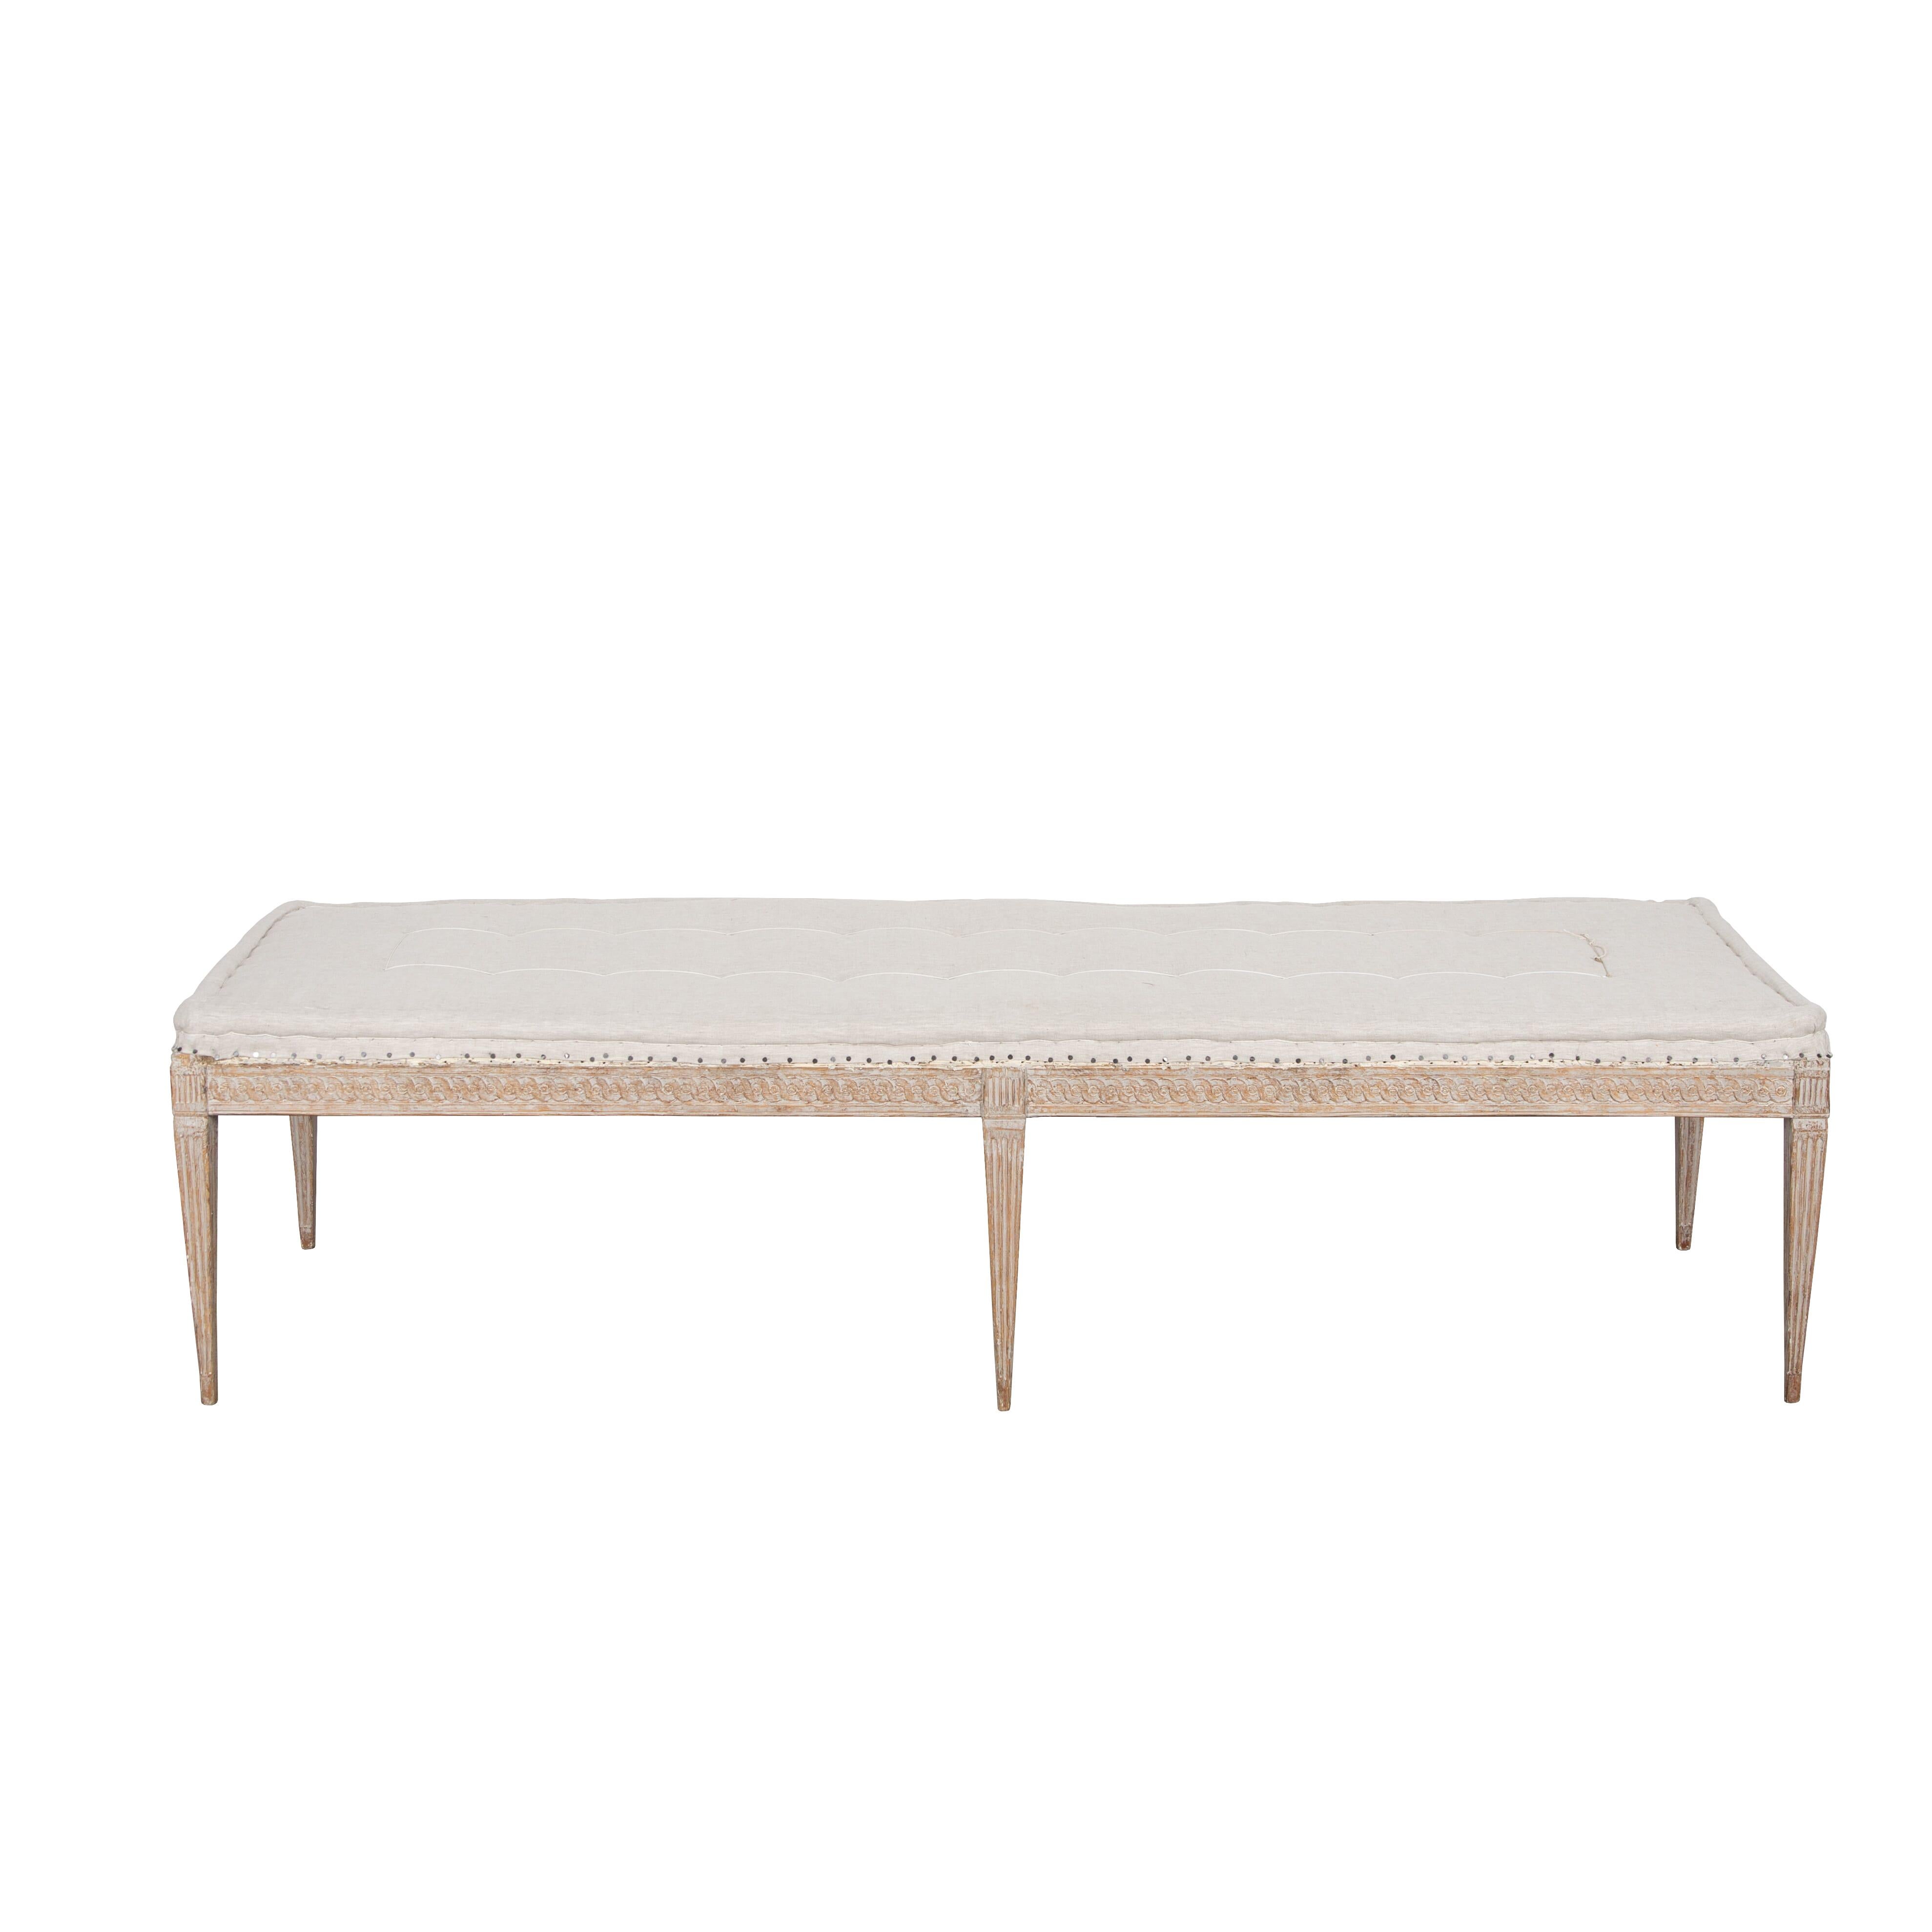 19th century period Gustavian bench.
With decorative carved detailing to the front stretcher and reeded design to the legs. Repainted in soft grey and newly upholstered in linen.
circa 1860.